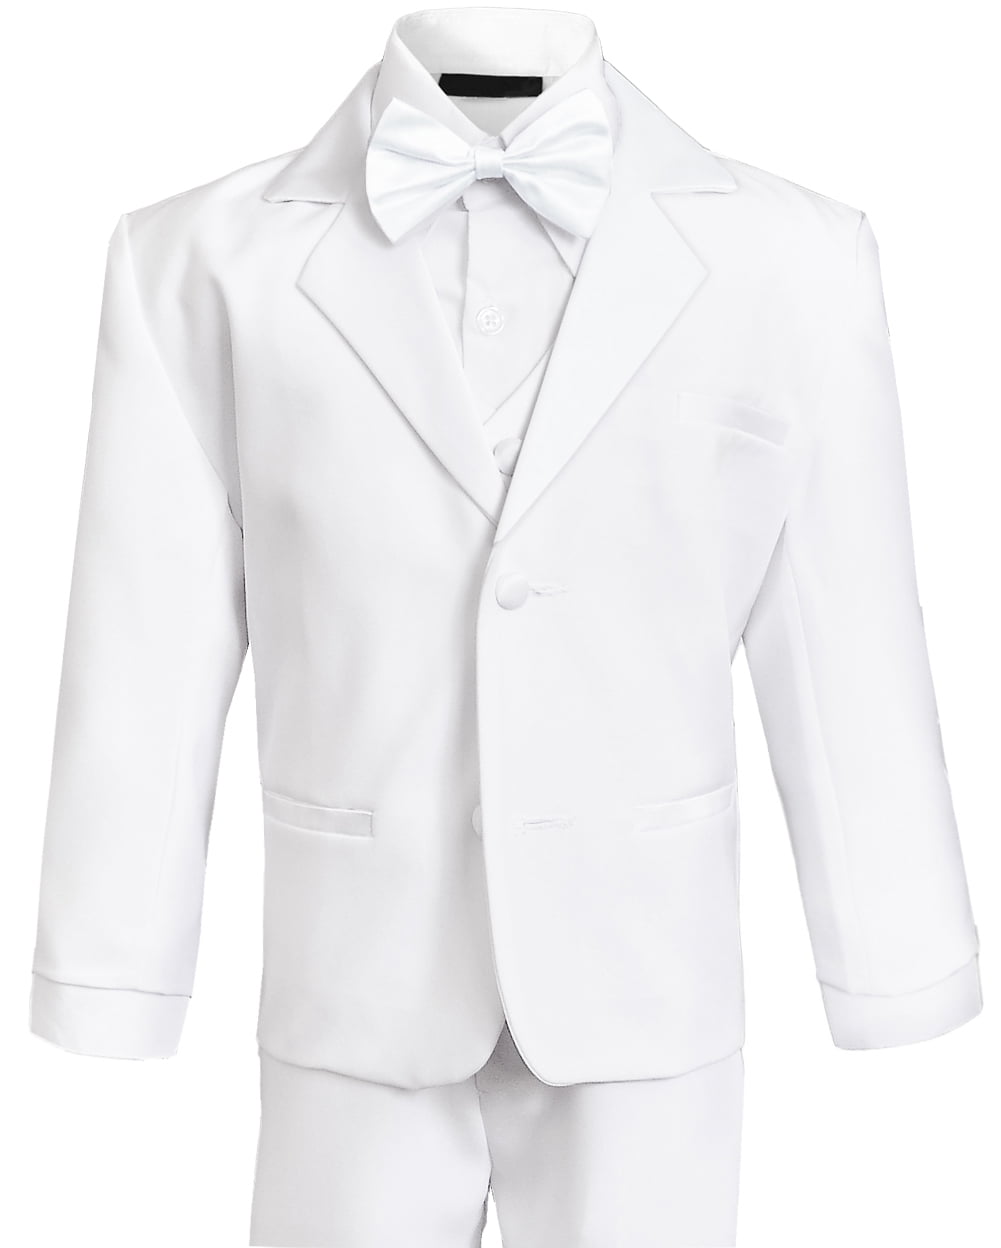 Black N Bianco Baby Boys and Infants Tuxedo with No Tail